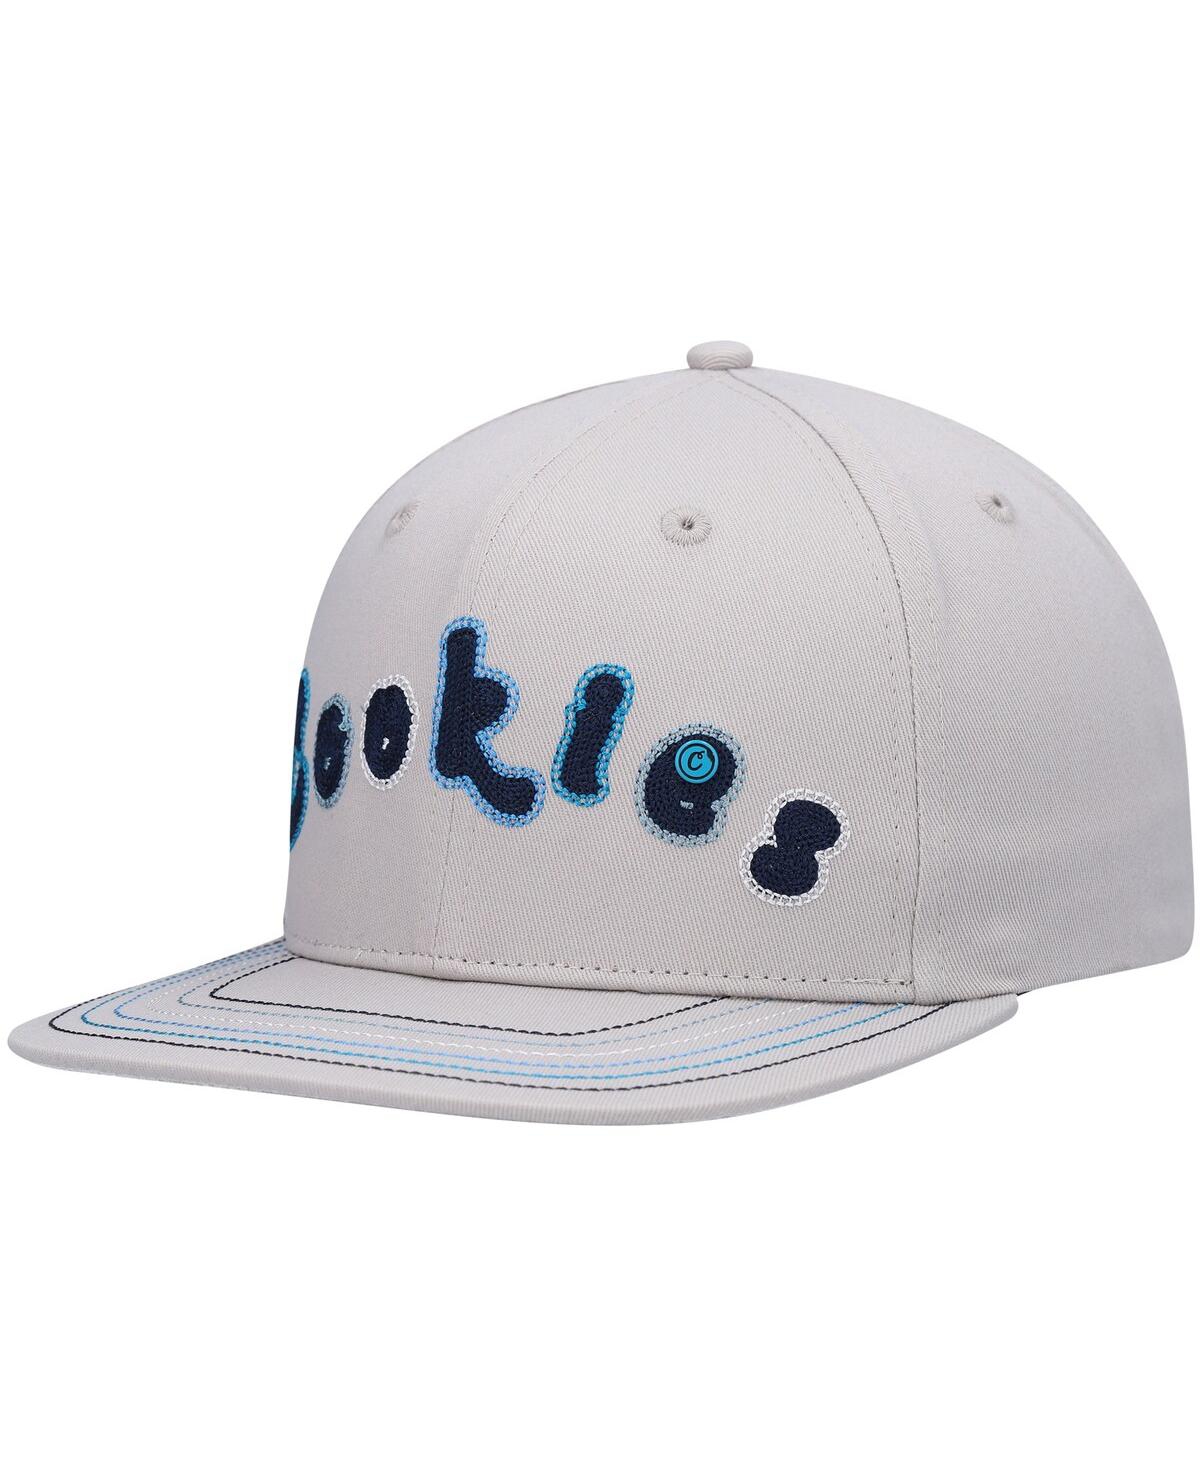 Men's Cookies Gray Show and Prove Snapback Hat - Gray